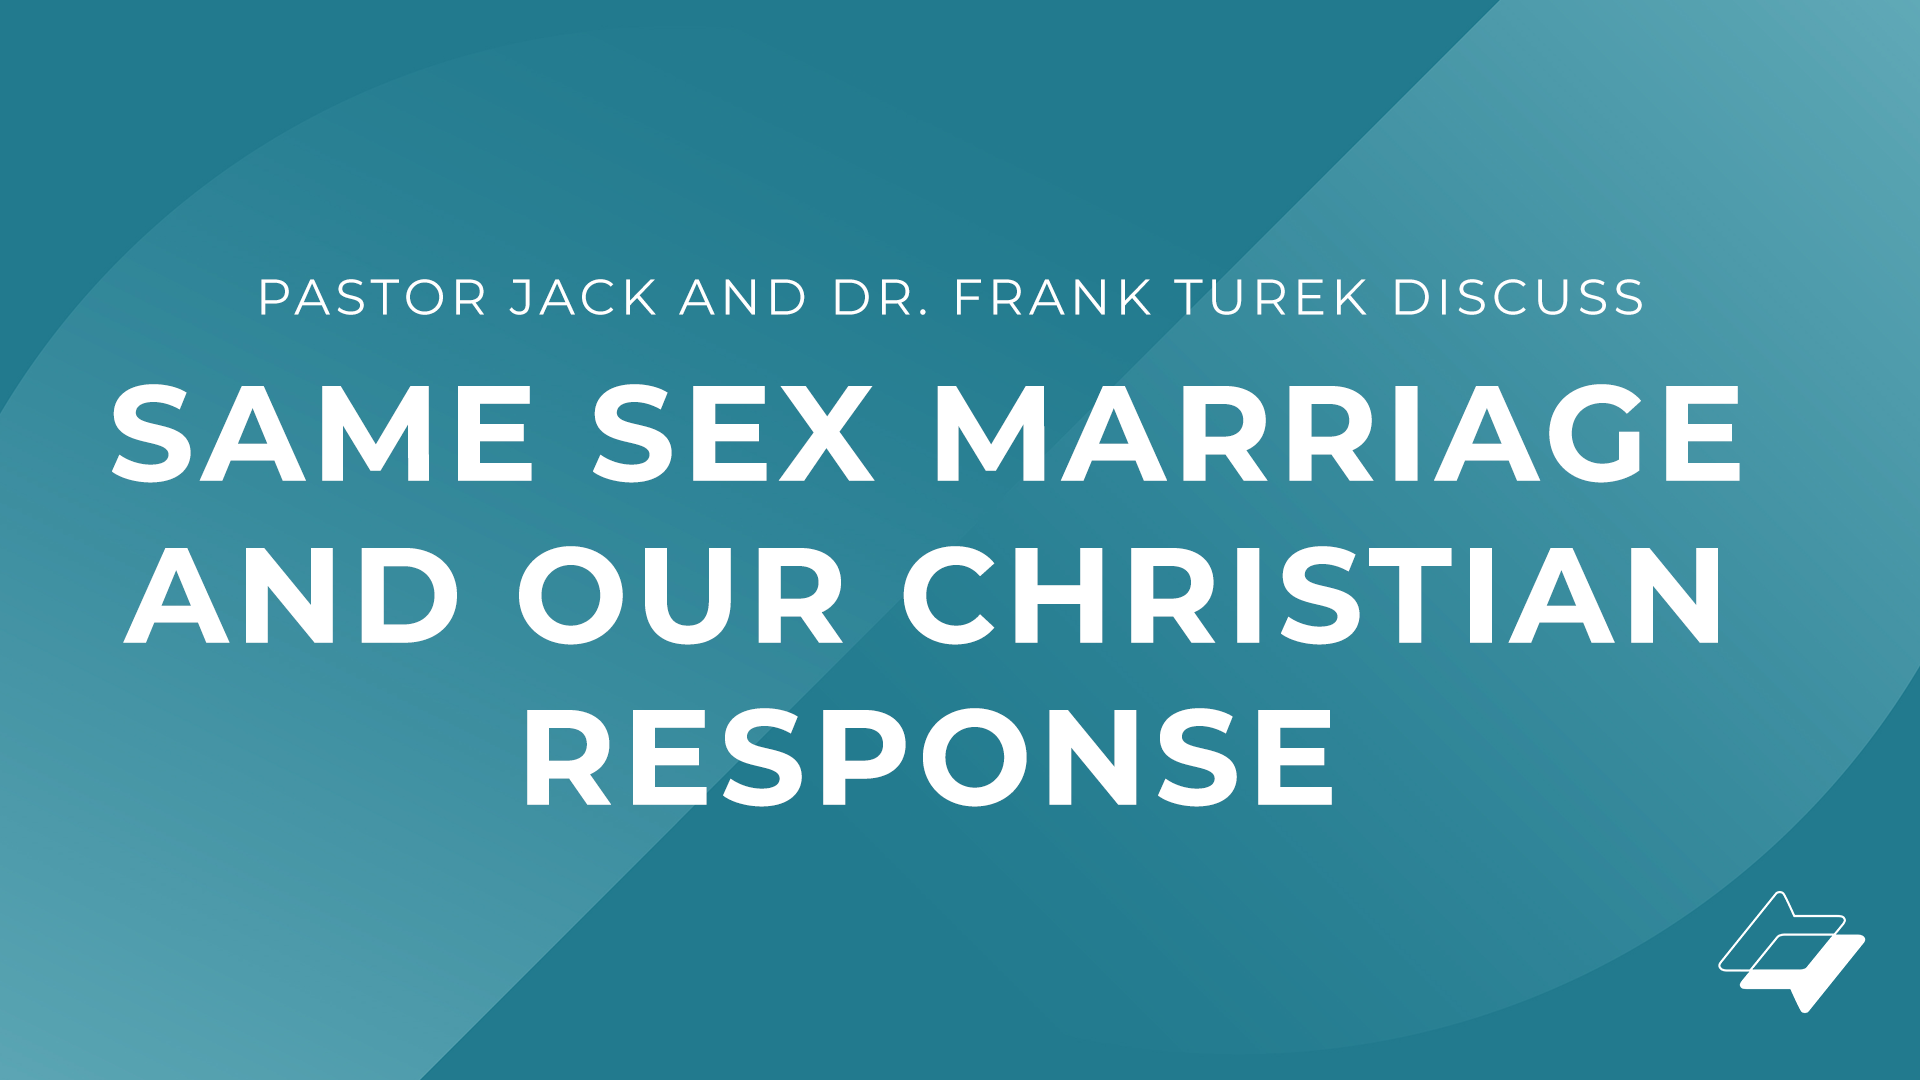 Pastor Jack and Dr. Frank Turek Discuss Same Sex Marriage and Our Christian Response